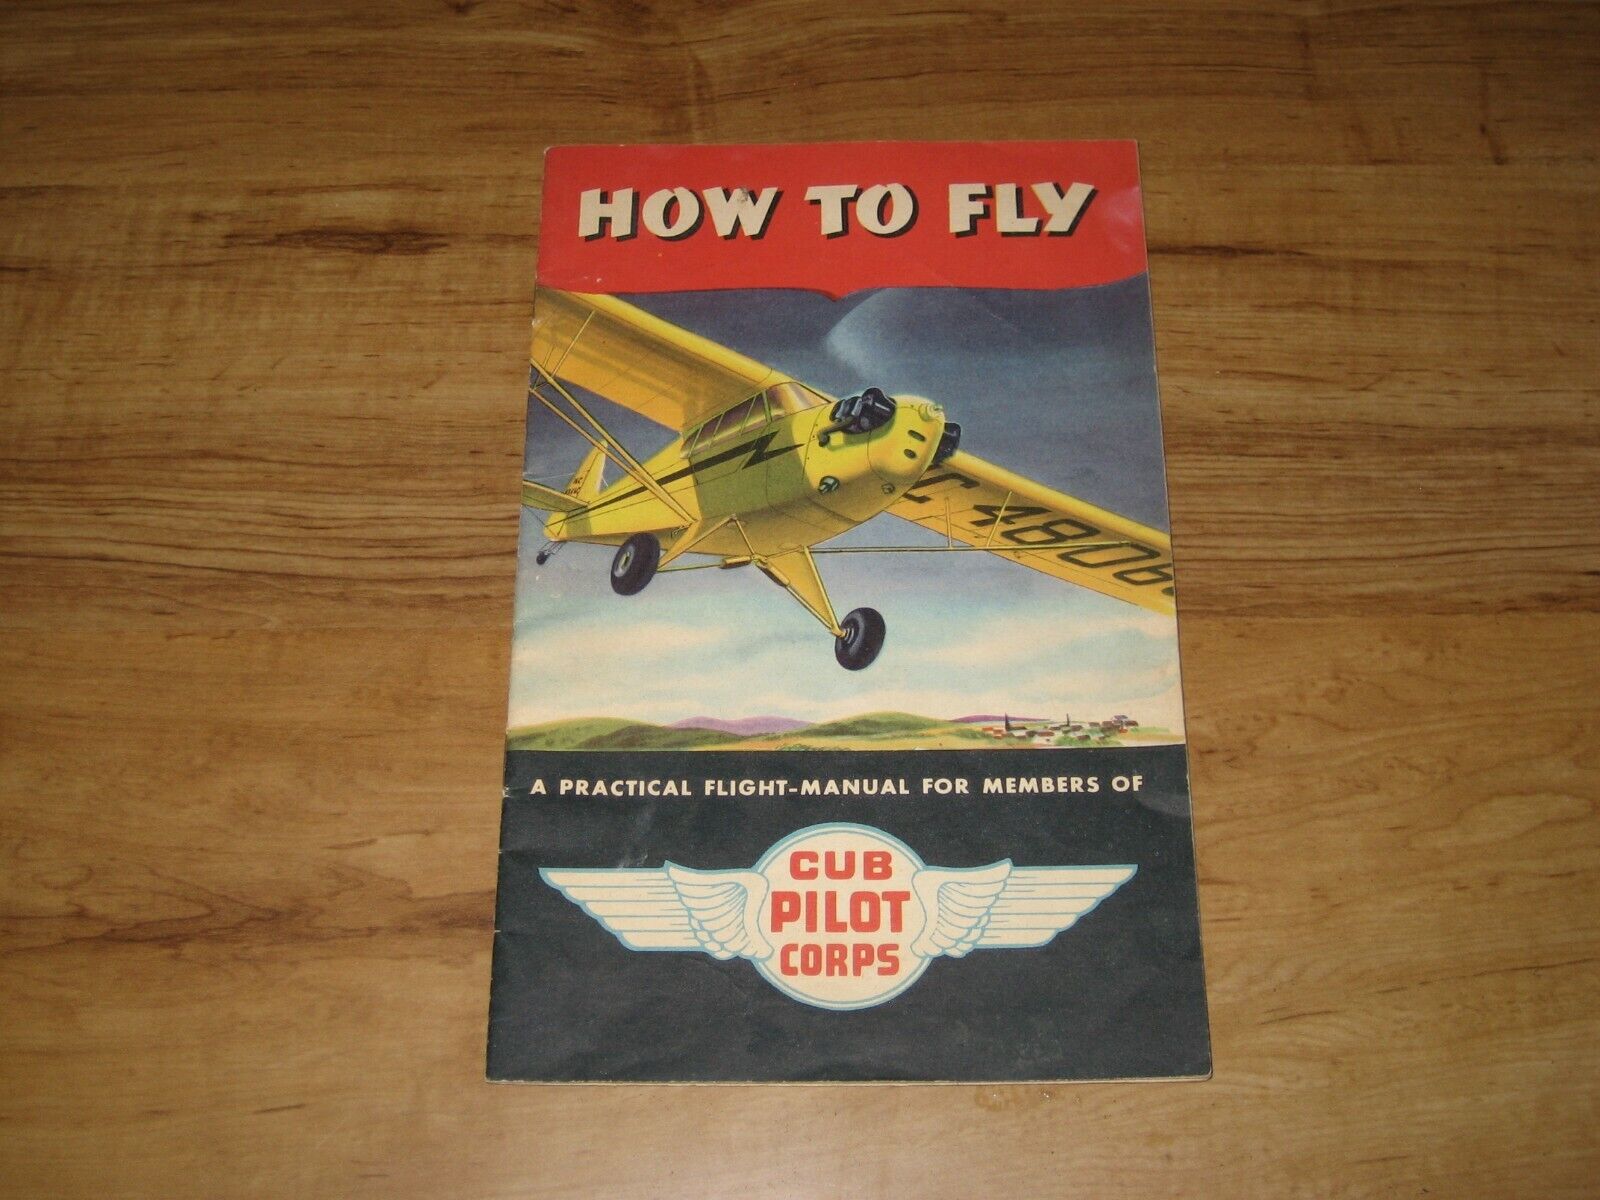  1940's How To Fly-Flight Manual For Members-Cub Pilot Corps-Piper Cub